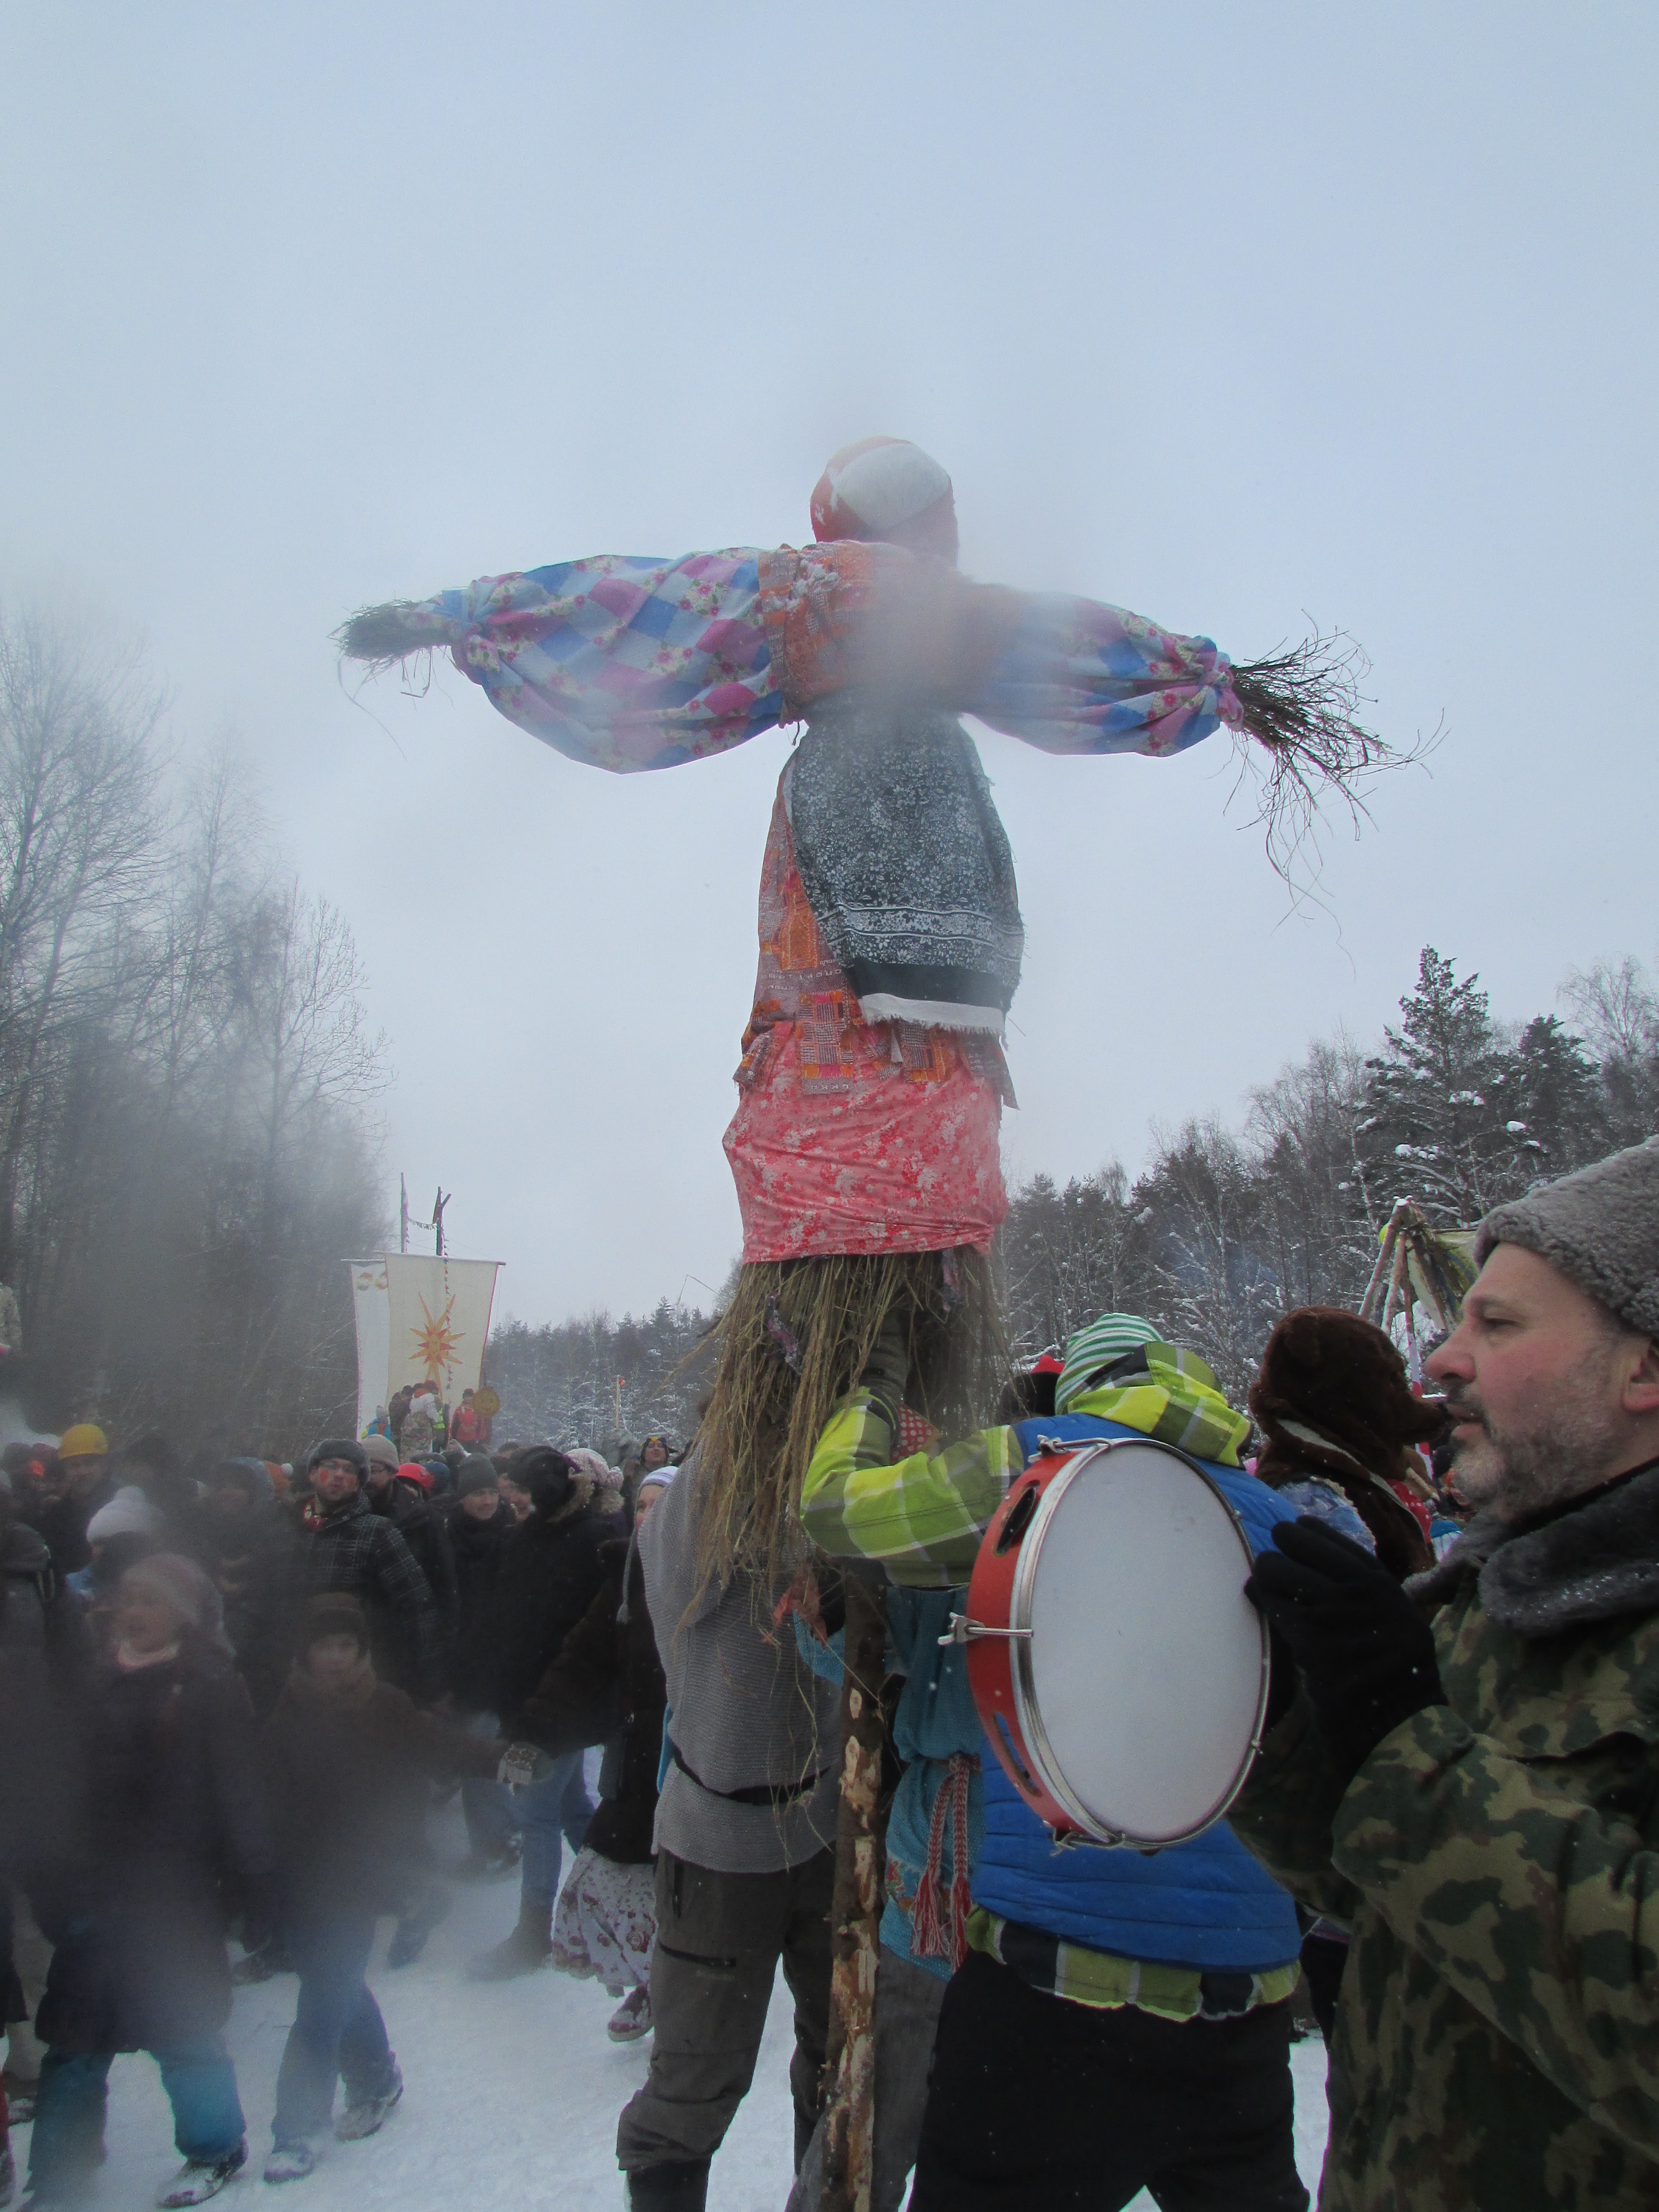 Straw effigy of a woman in traditional dress surrounded by a crowd